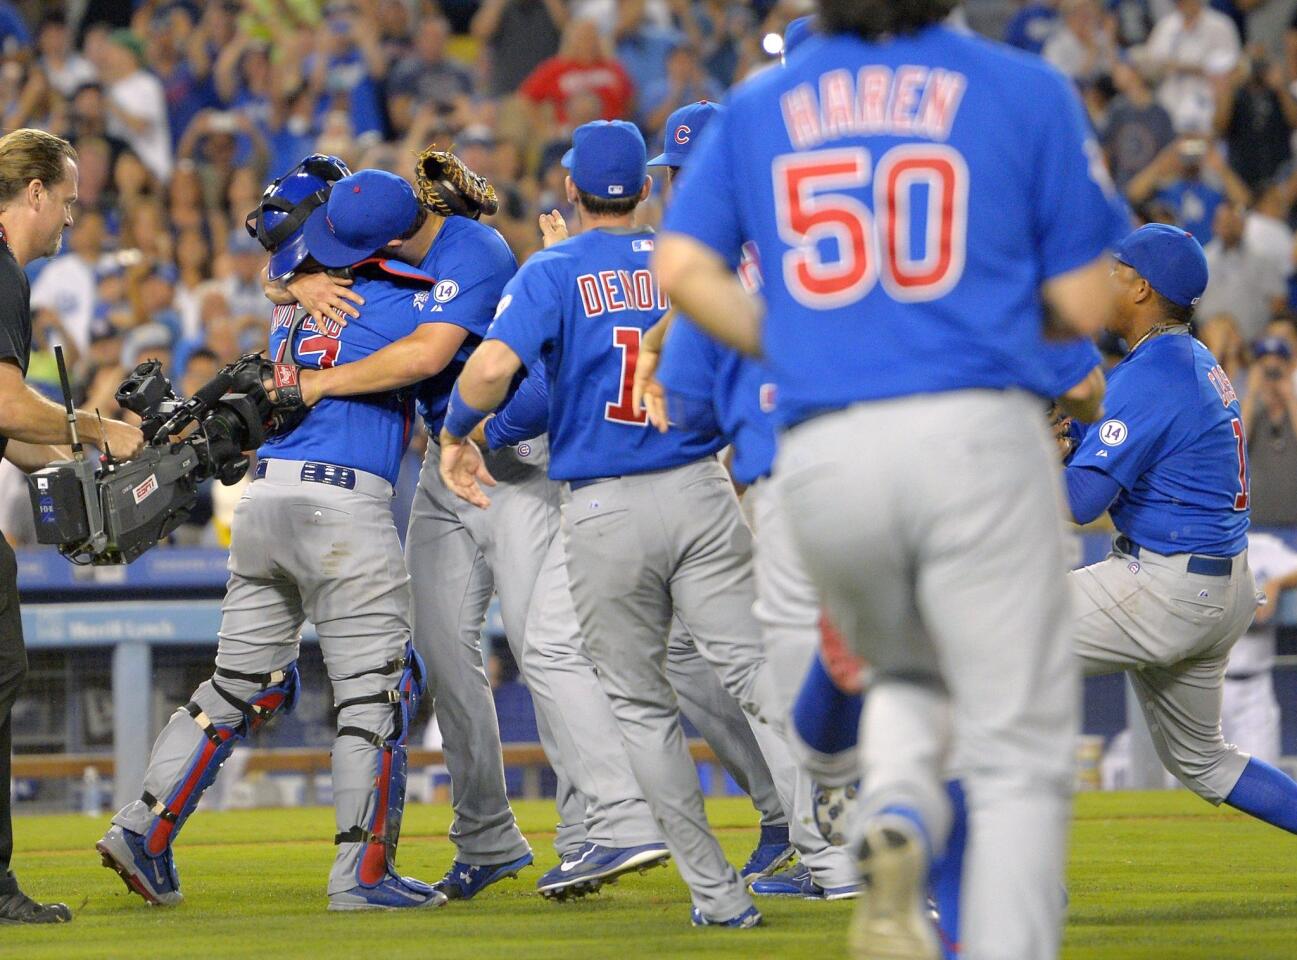 Jake Arrieta celebrates with teammates after throwing his first career no-hitter.